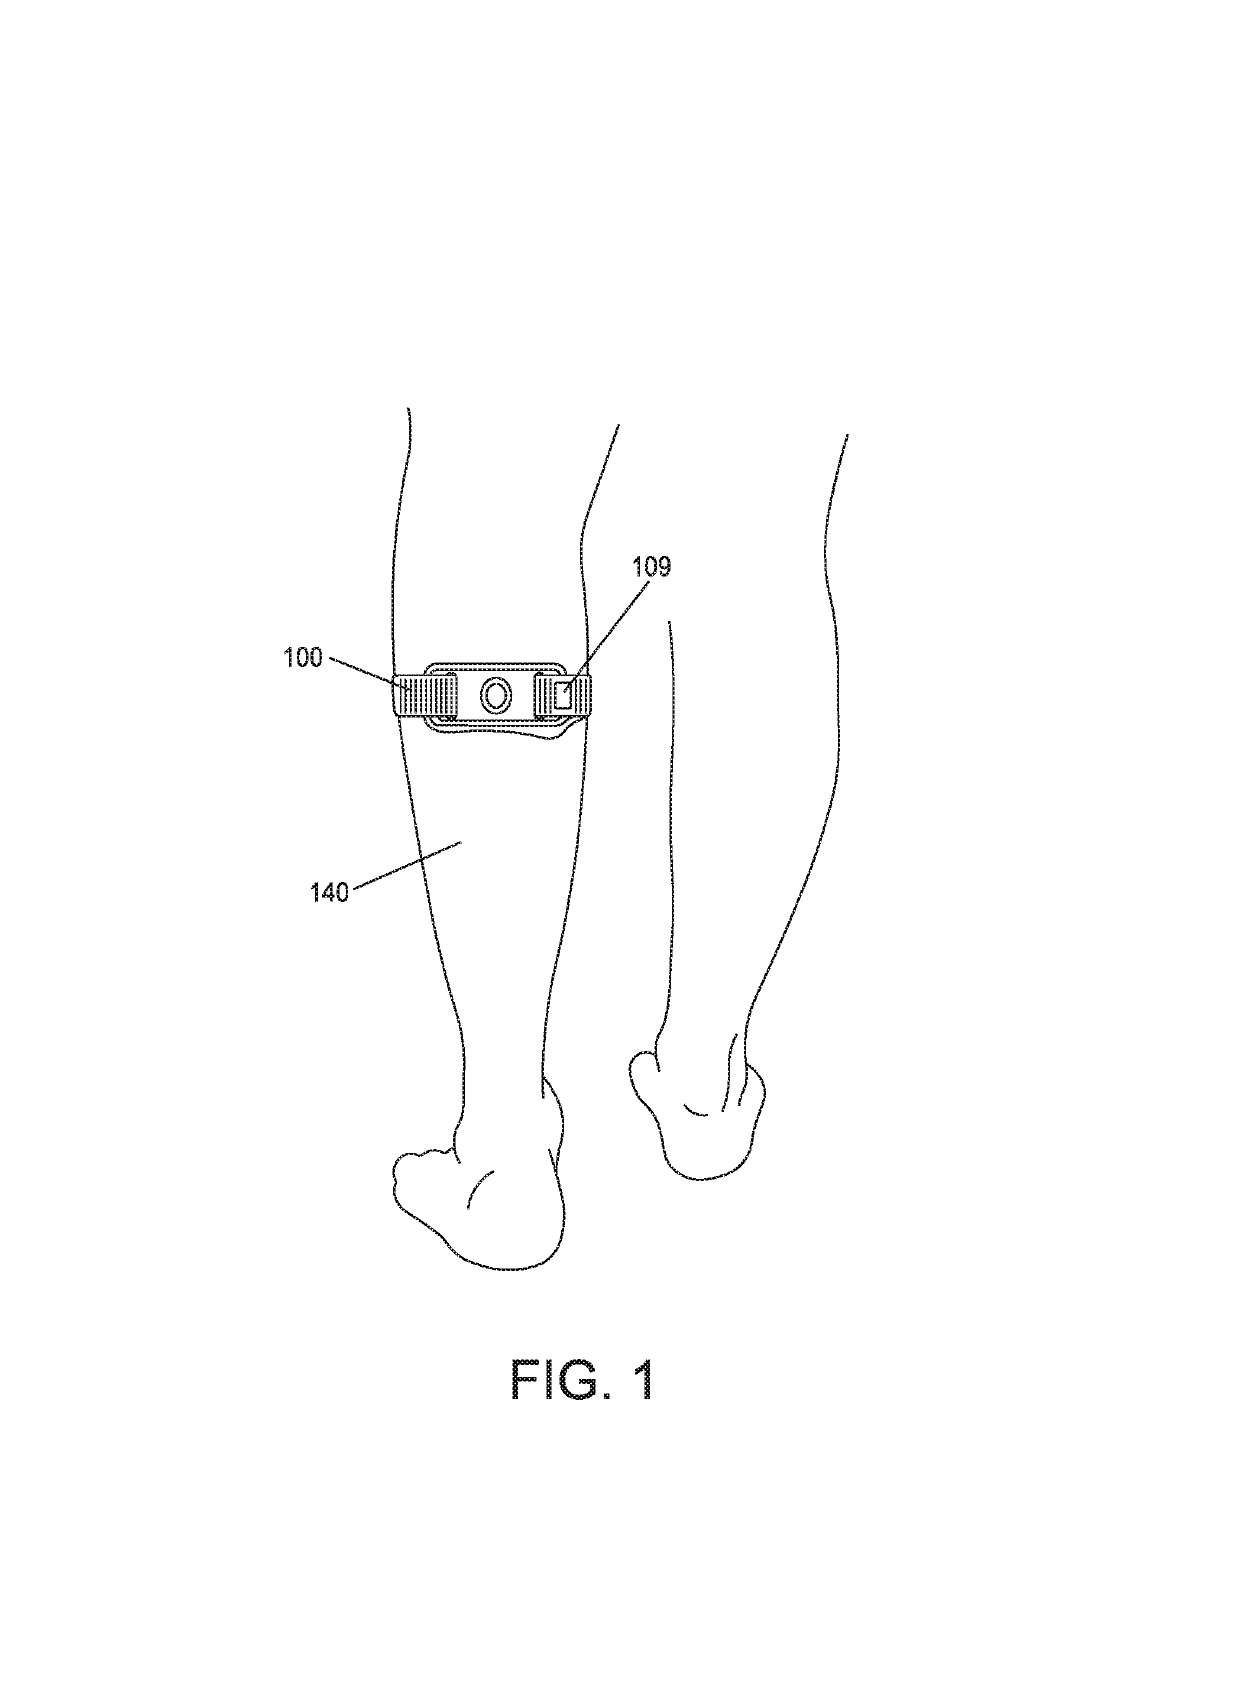 Transcutaneous electrical nerve stimulator with automatic detection of user sleep-wake state